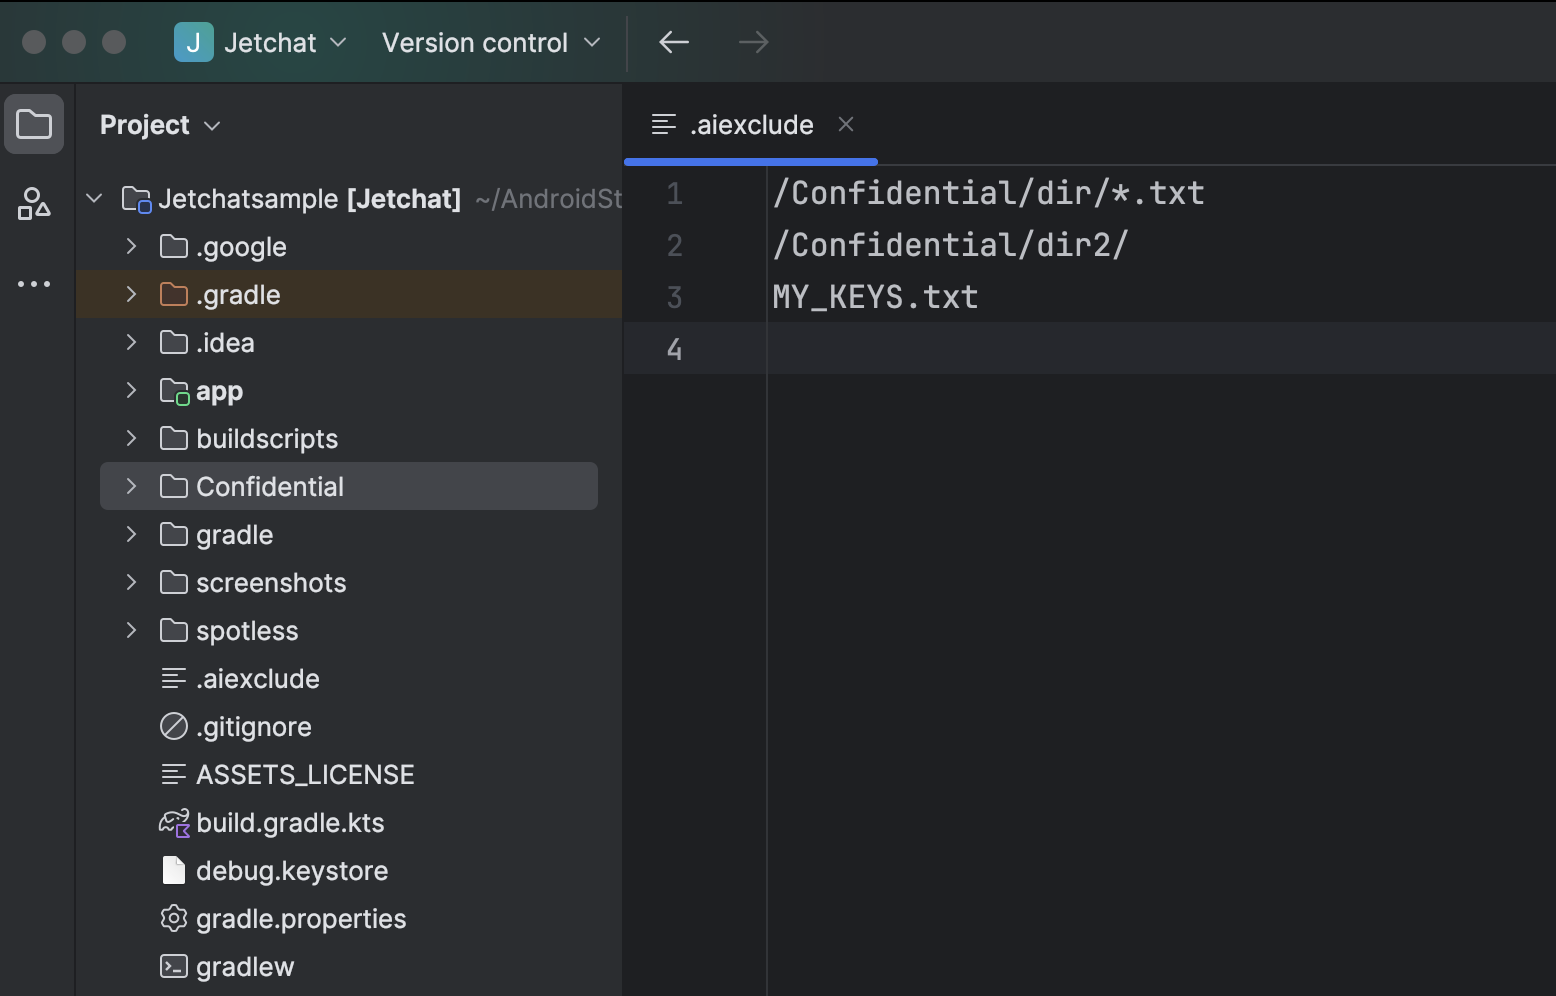 Screenshot of .aiexclude config file